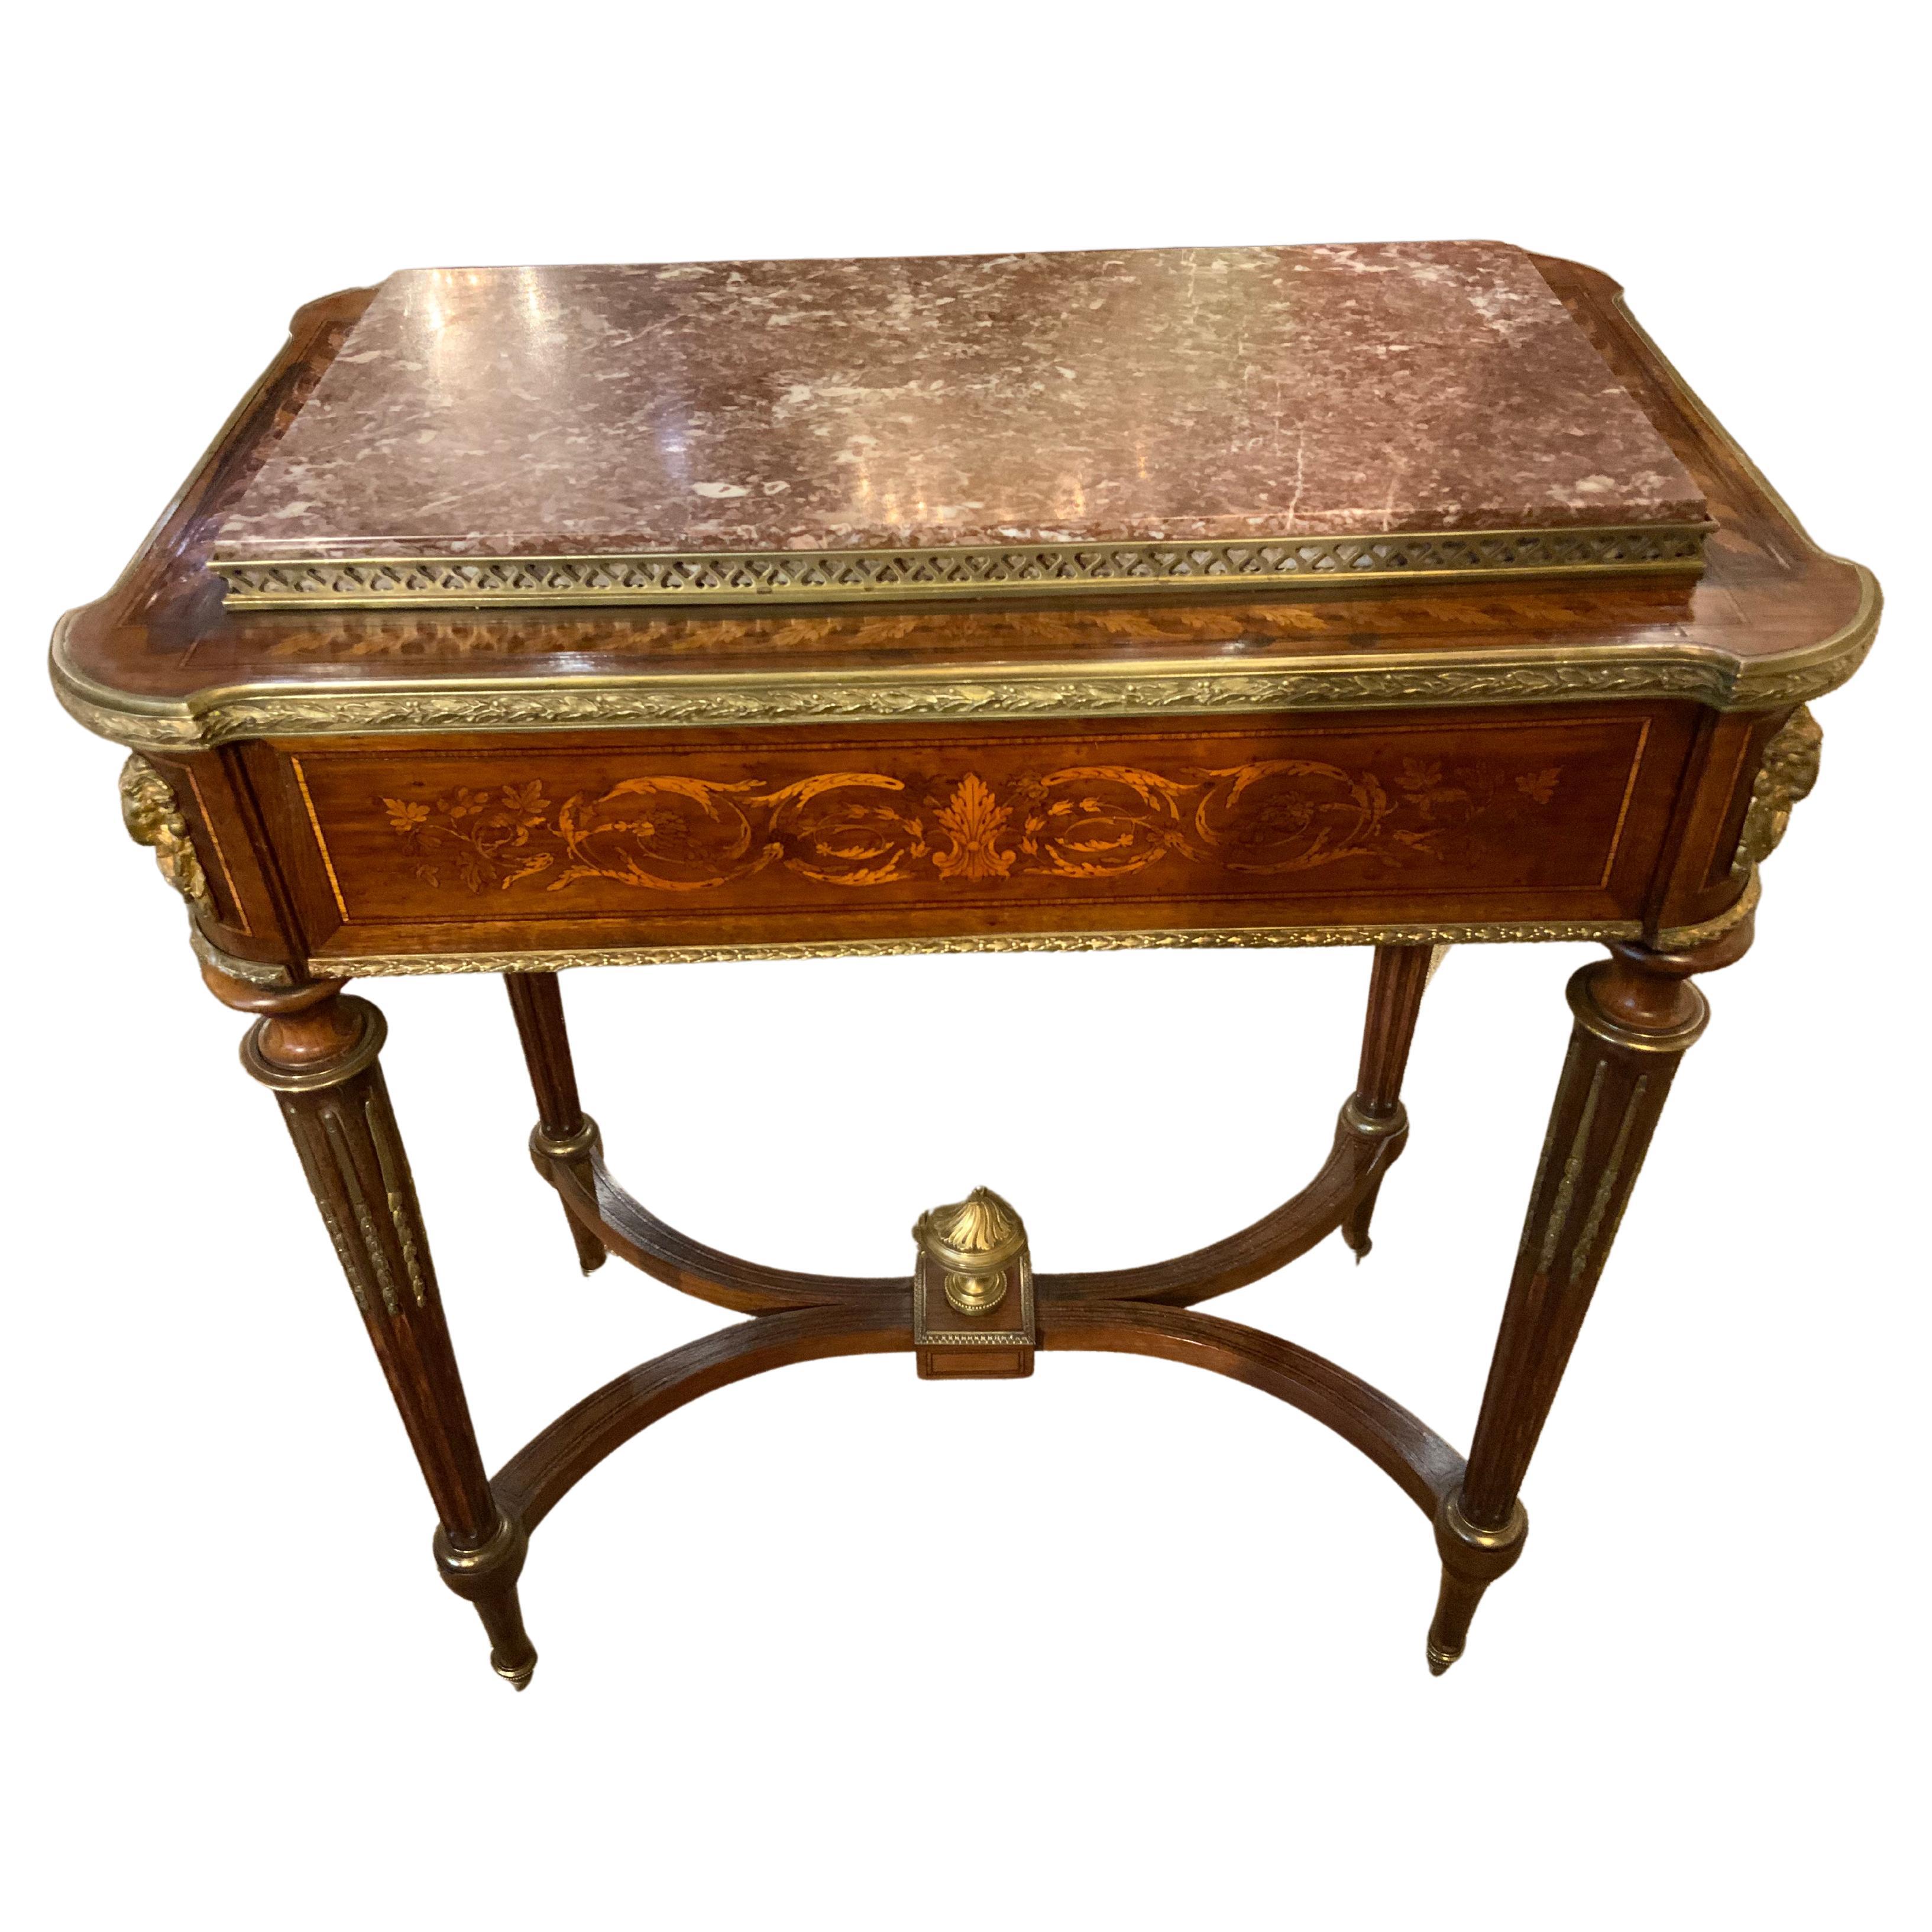 French Louis XVI-Style Table, 19th Century with Marquetry Inlay, Marble Top For Sale